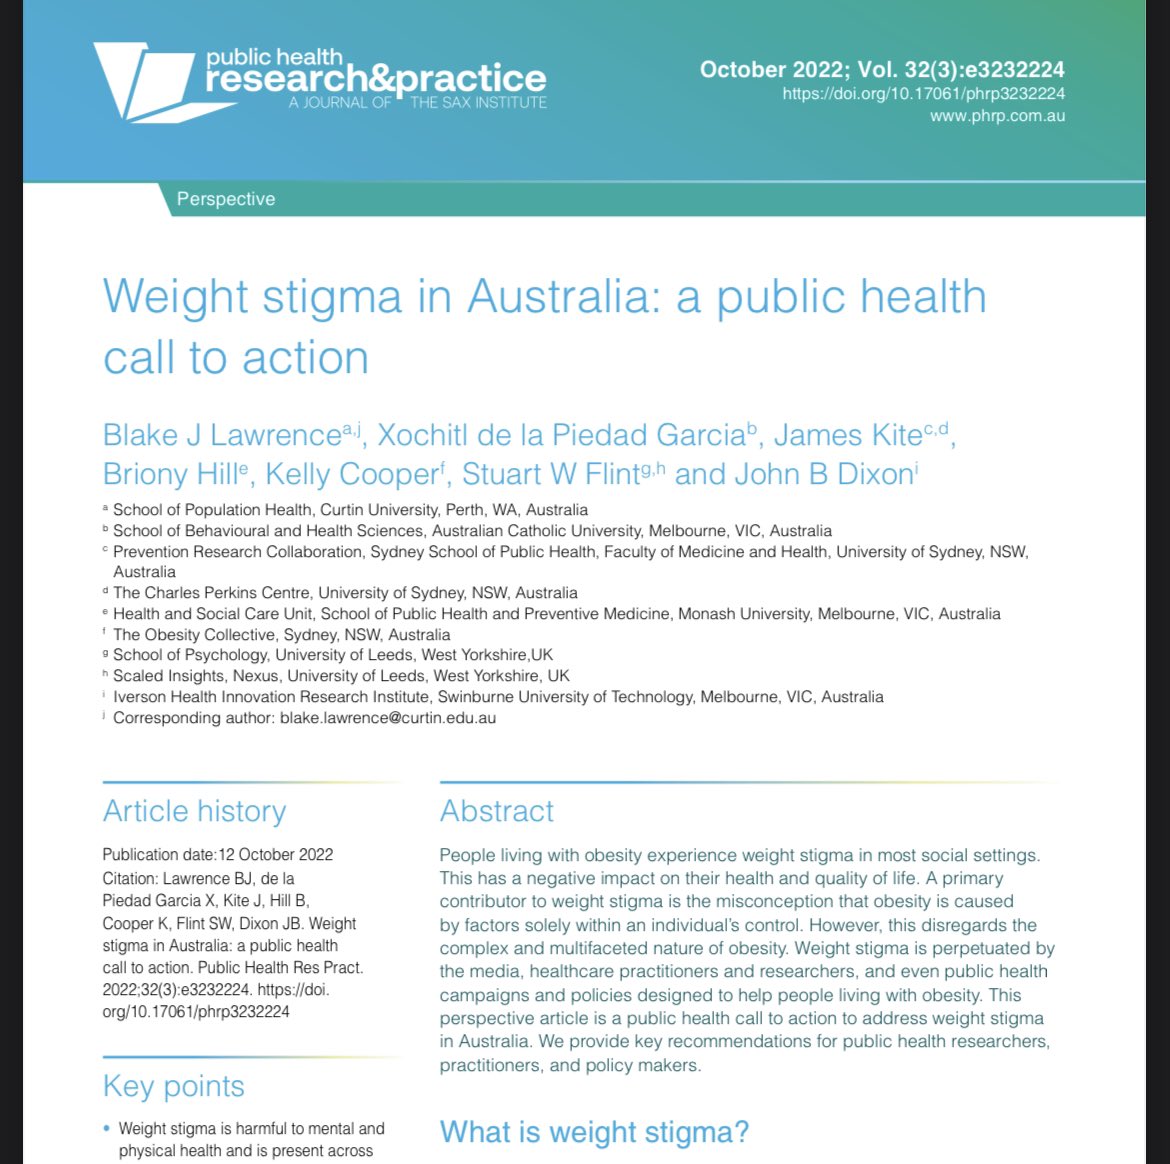 There is good traction on including lived experience of #obesity & other #NCDs, & #media - #journalists & editors help share these stories, but we still have problems w images & language antagonising weight #stigma. Great @phrpjournal article 👇 #ICO2022 phrp.com.au/issues/october…